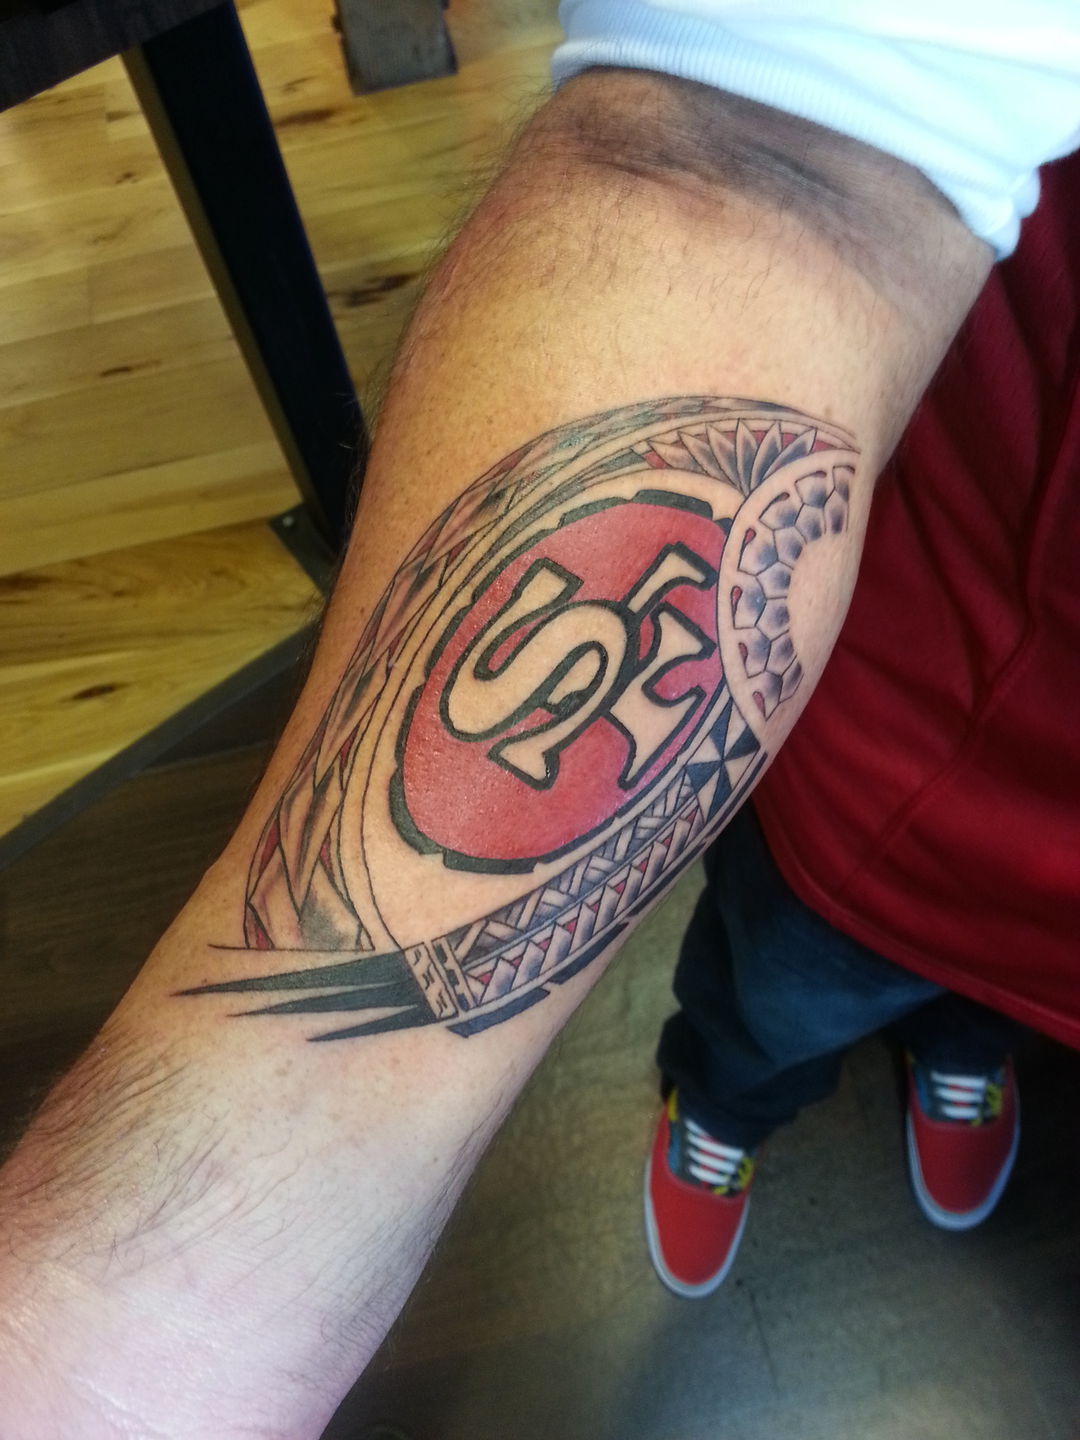 49ers' in Tattoos • Search in +1.3M Tattoos Now • Tattoodo